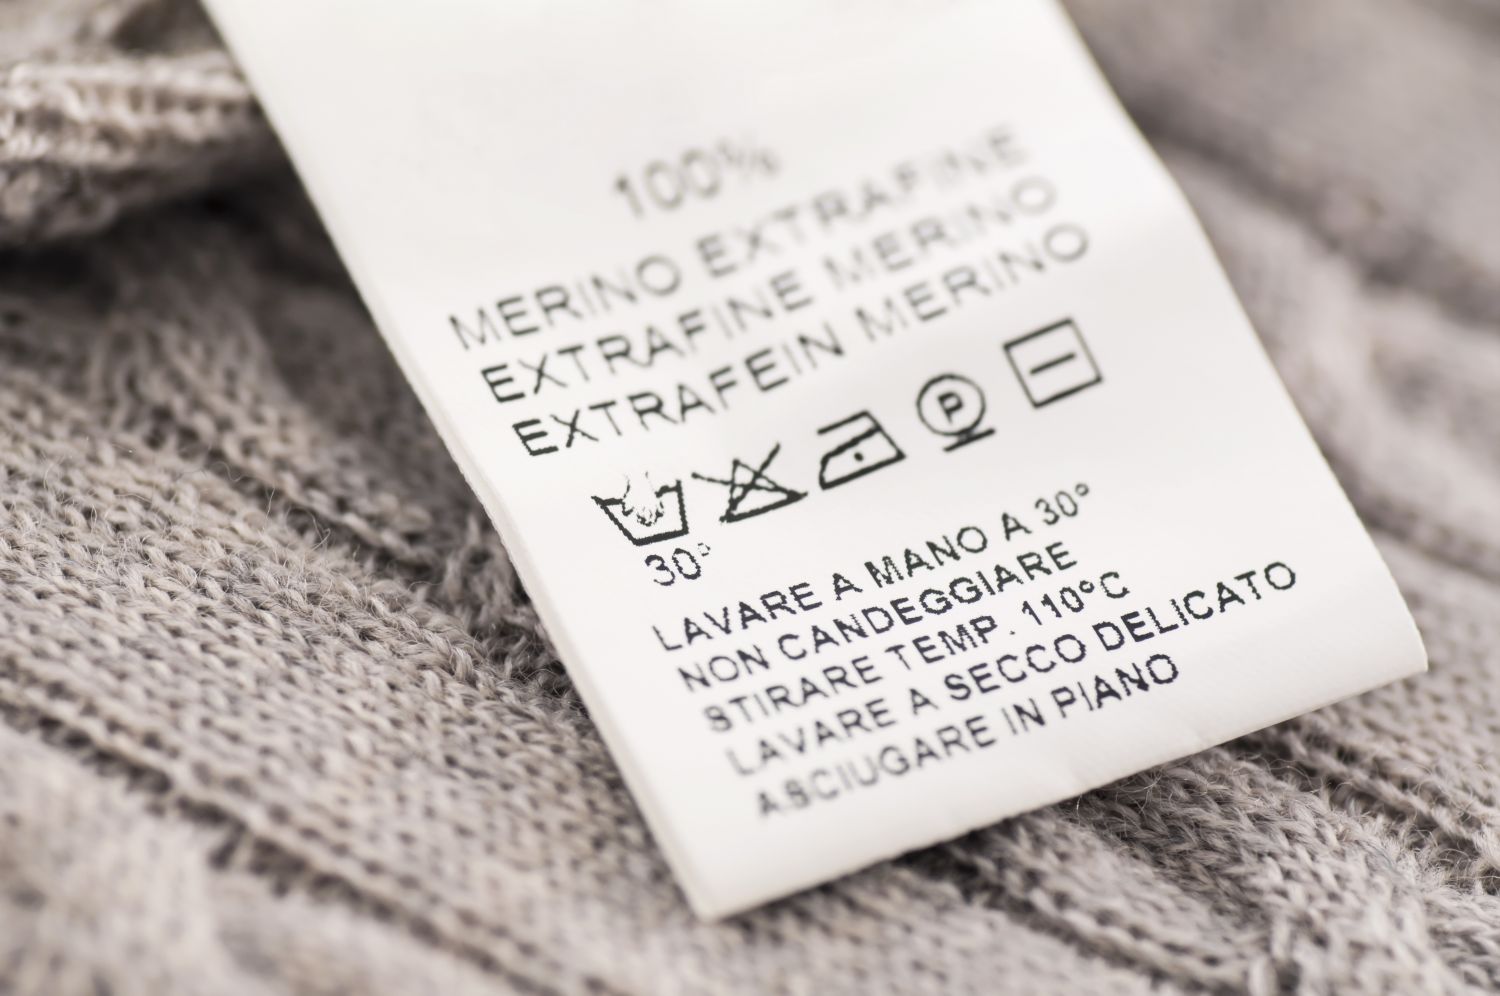 Clothing-Labeling-Regulations-A-Guide-For-Garment-Makers